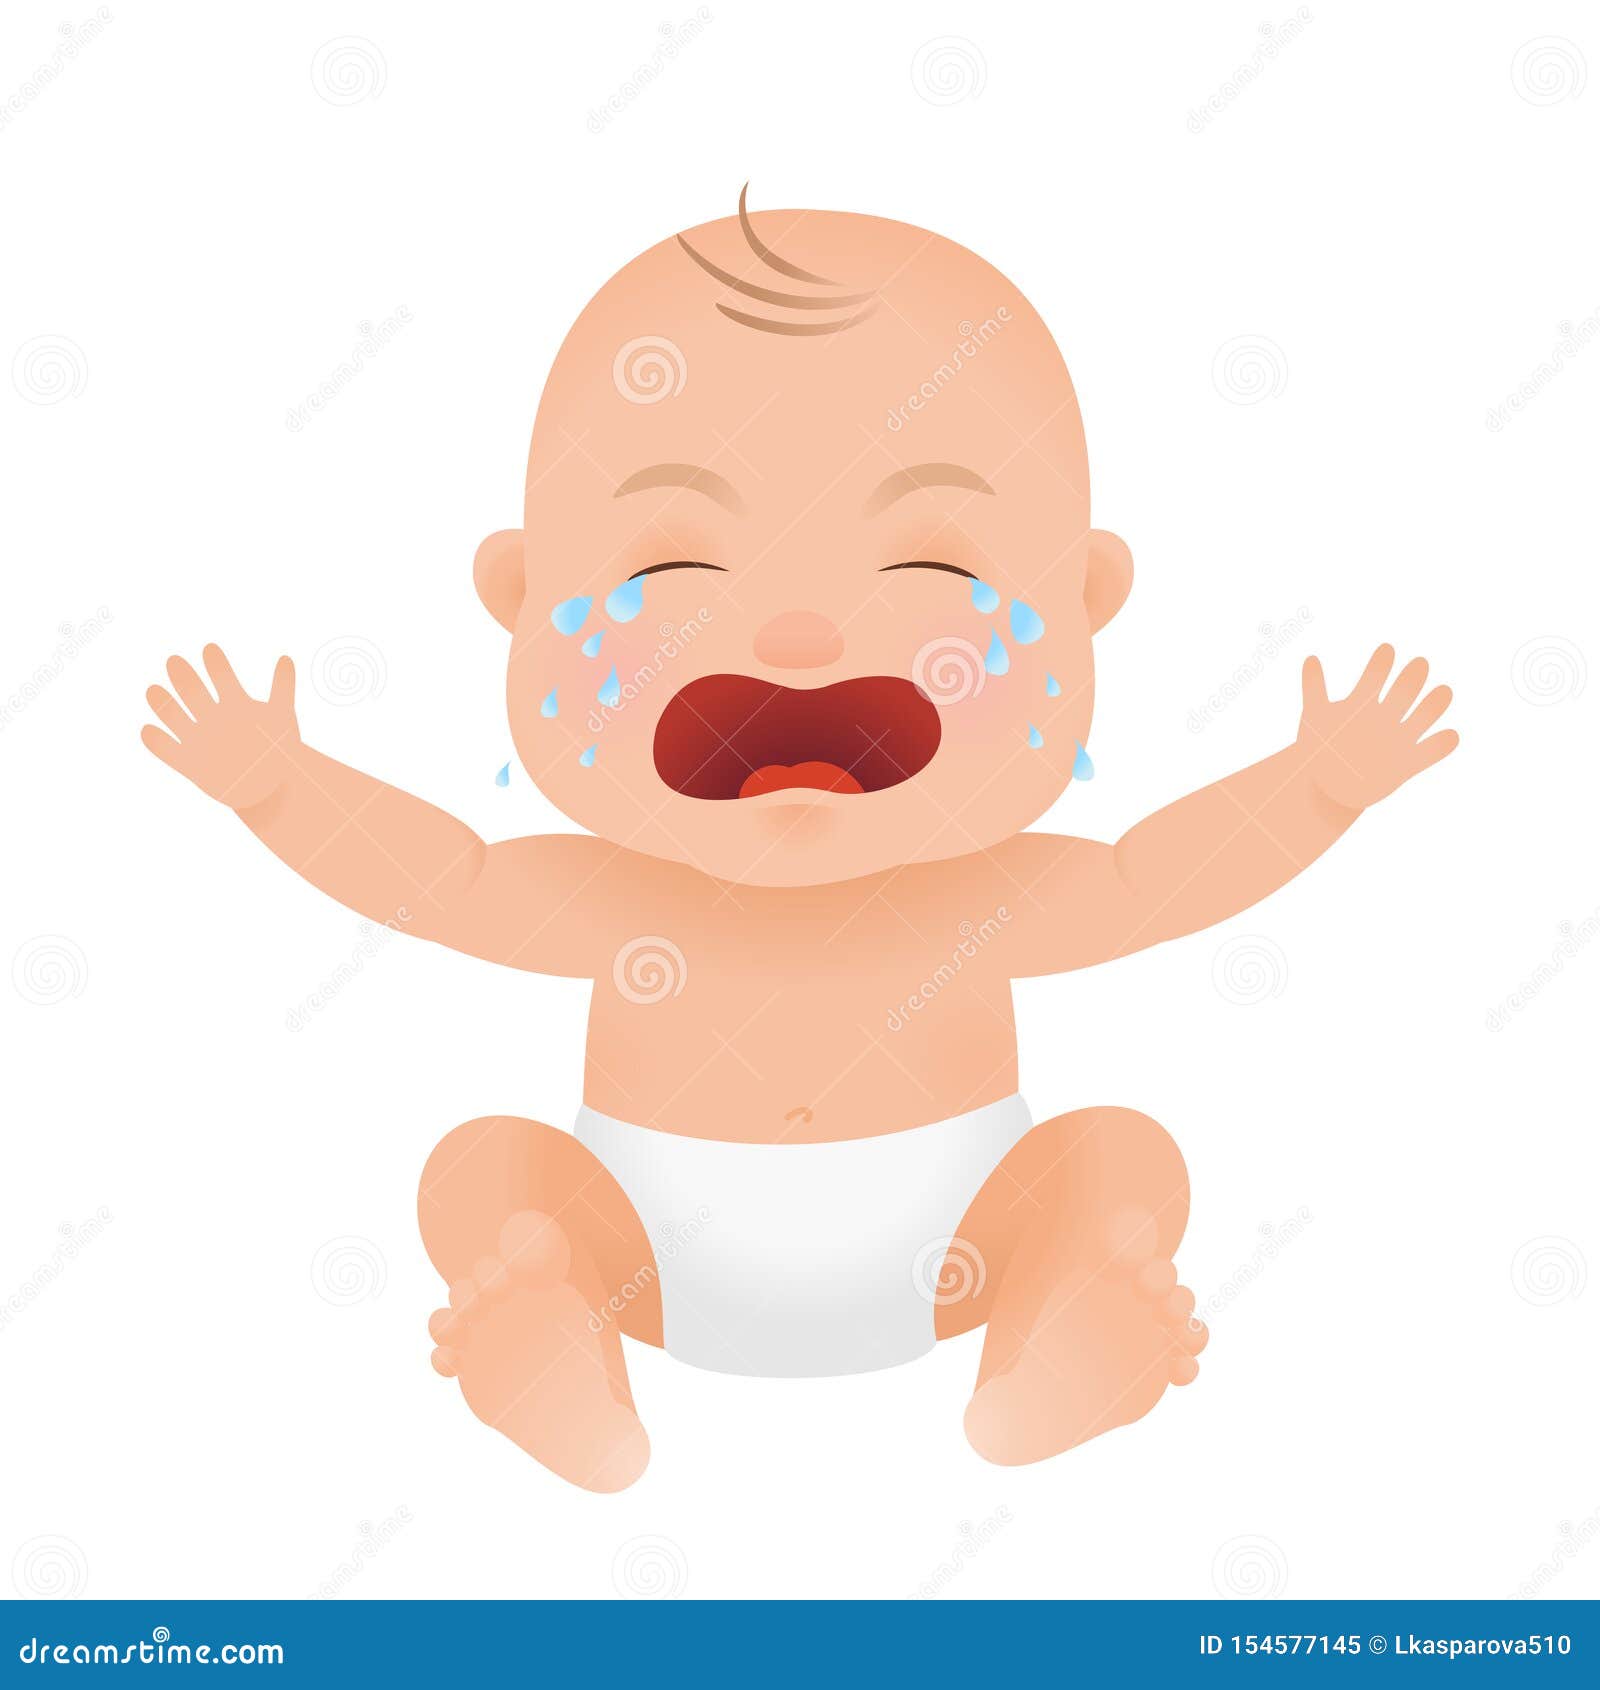 Cartoon crying baby stock vector. Illustration of mouth - 154577145